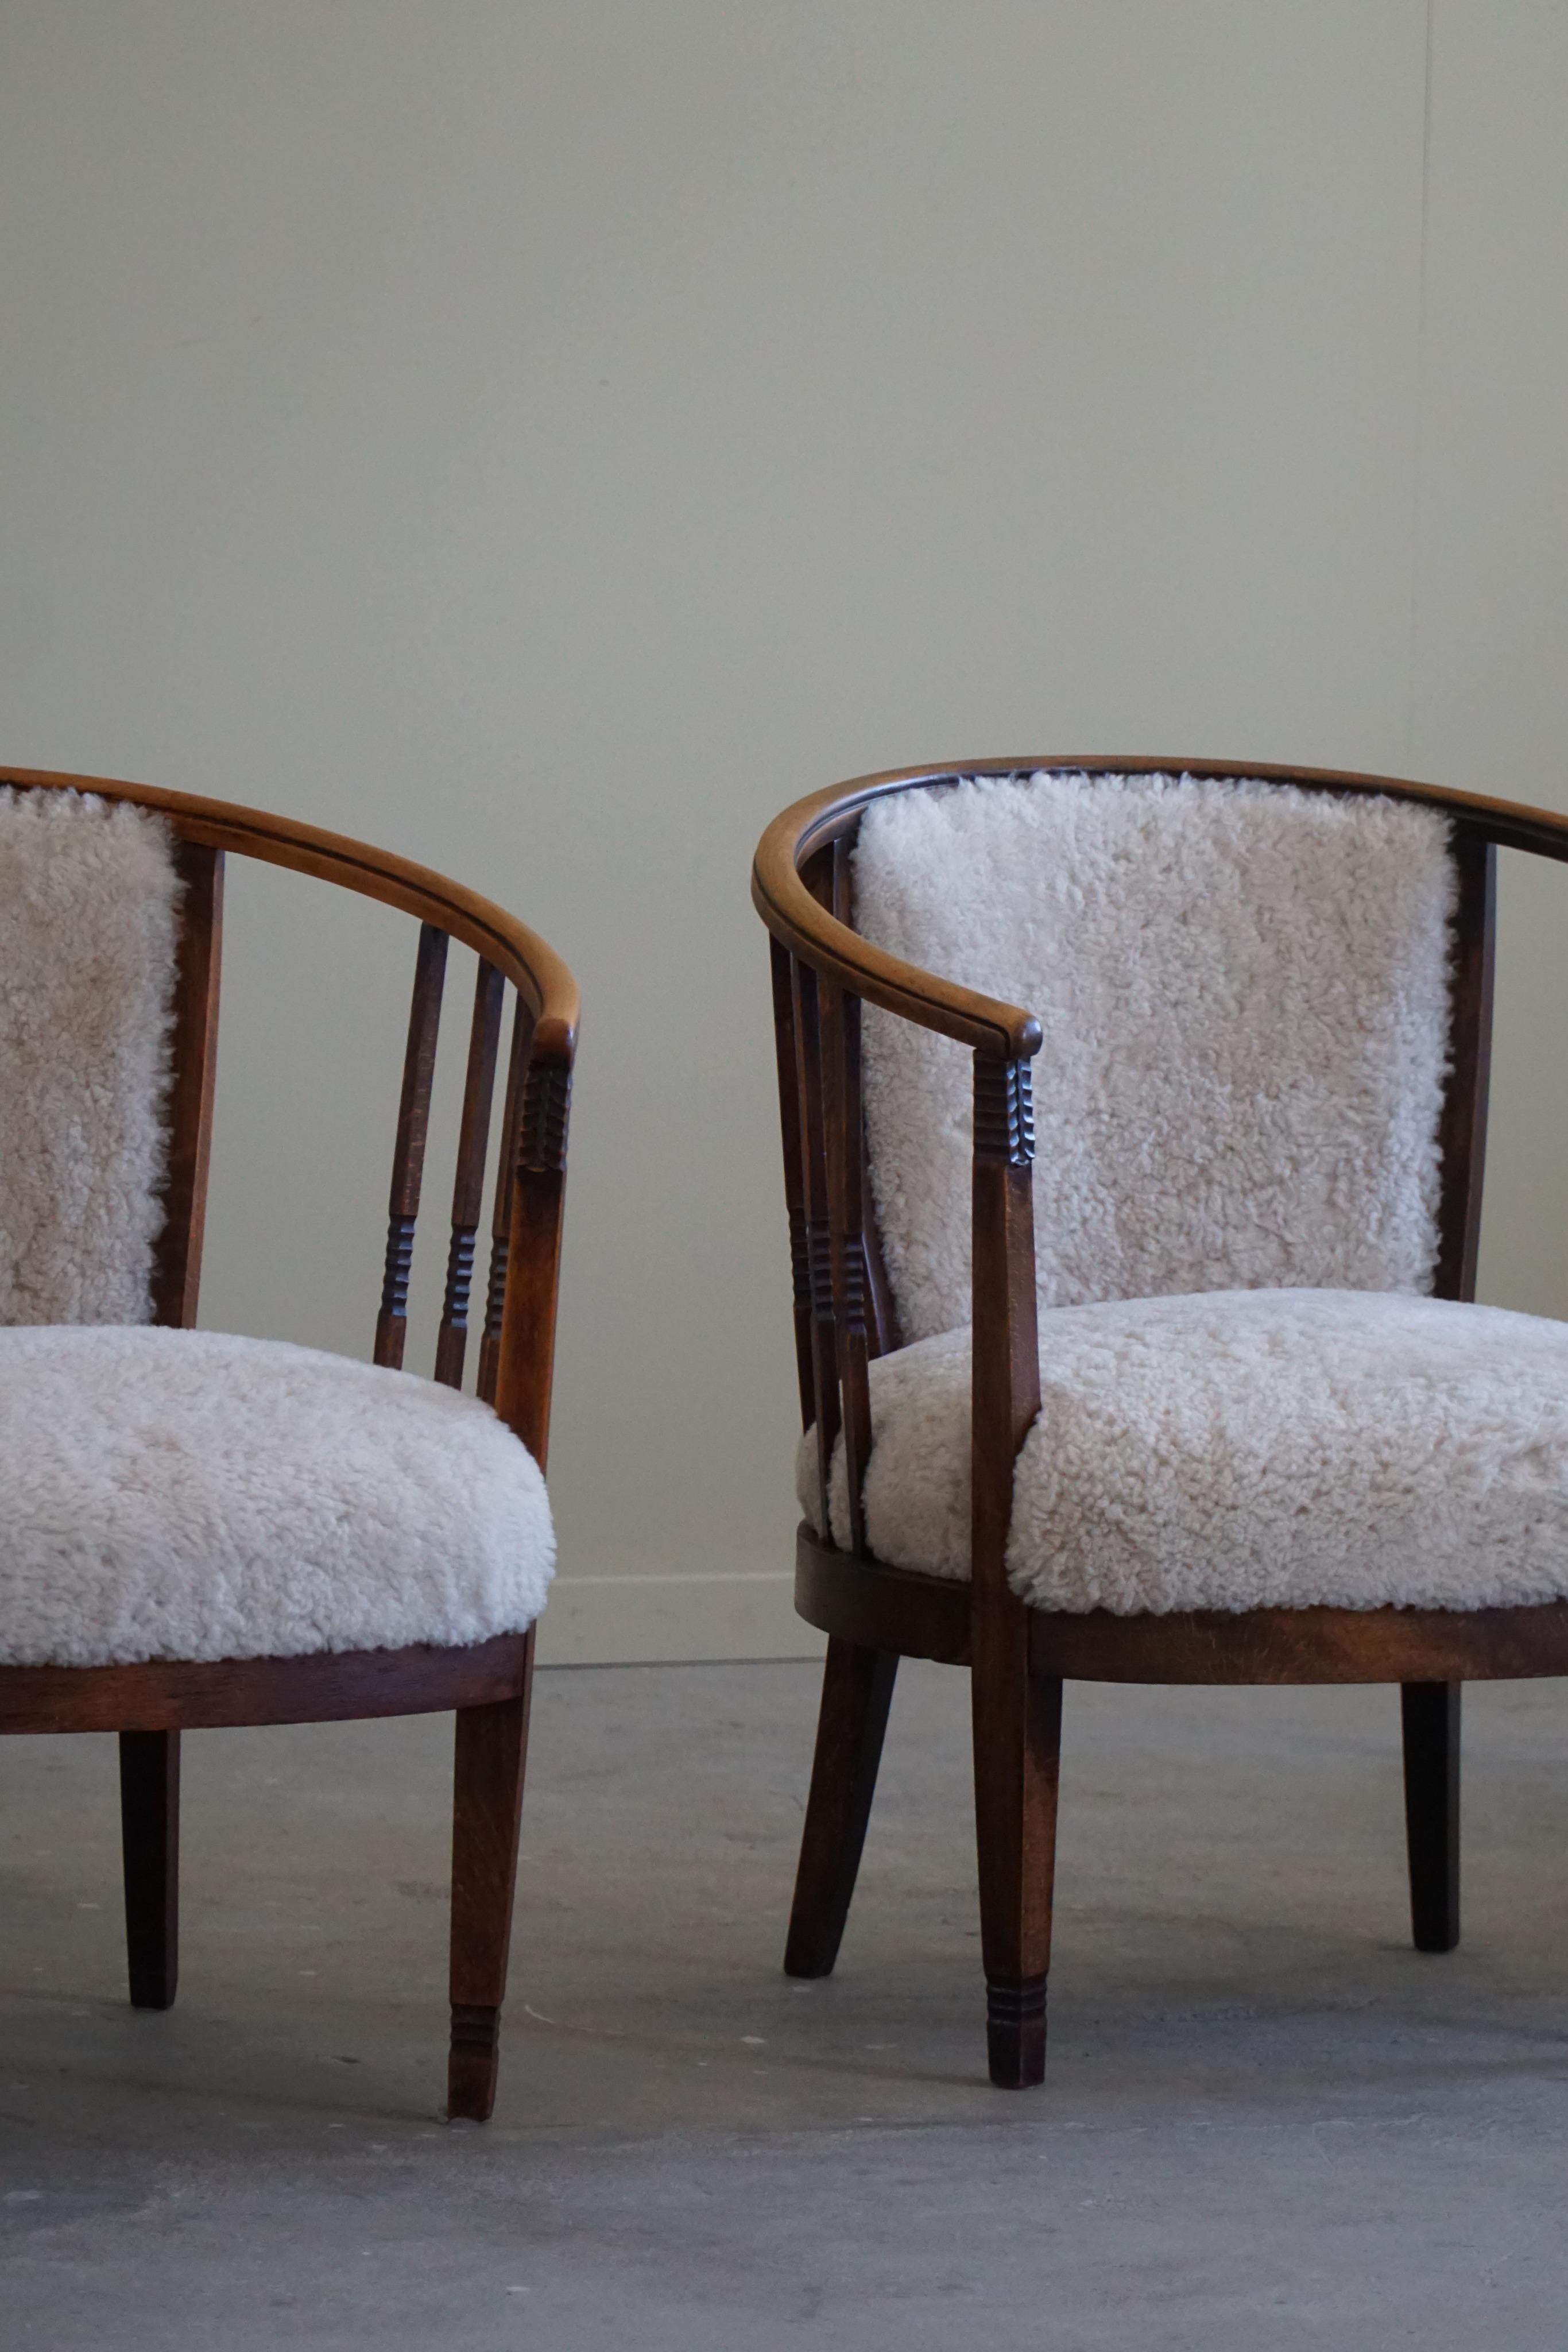 Pair of Danish Armchairs in Beech, Reupholstered Lambswool, Jugendstil, 1900s For Sale 4